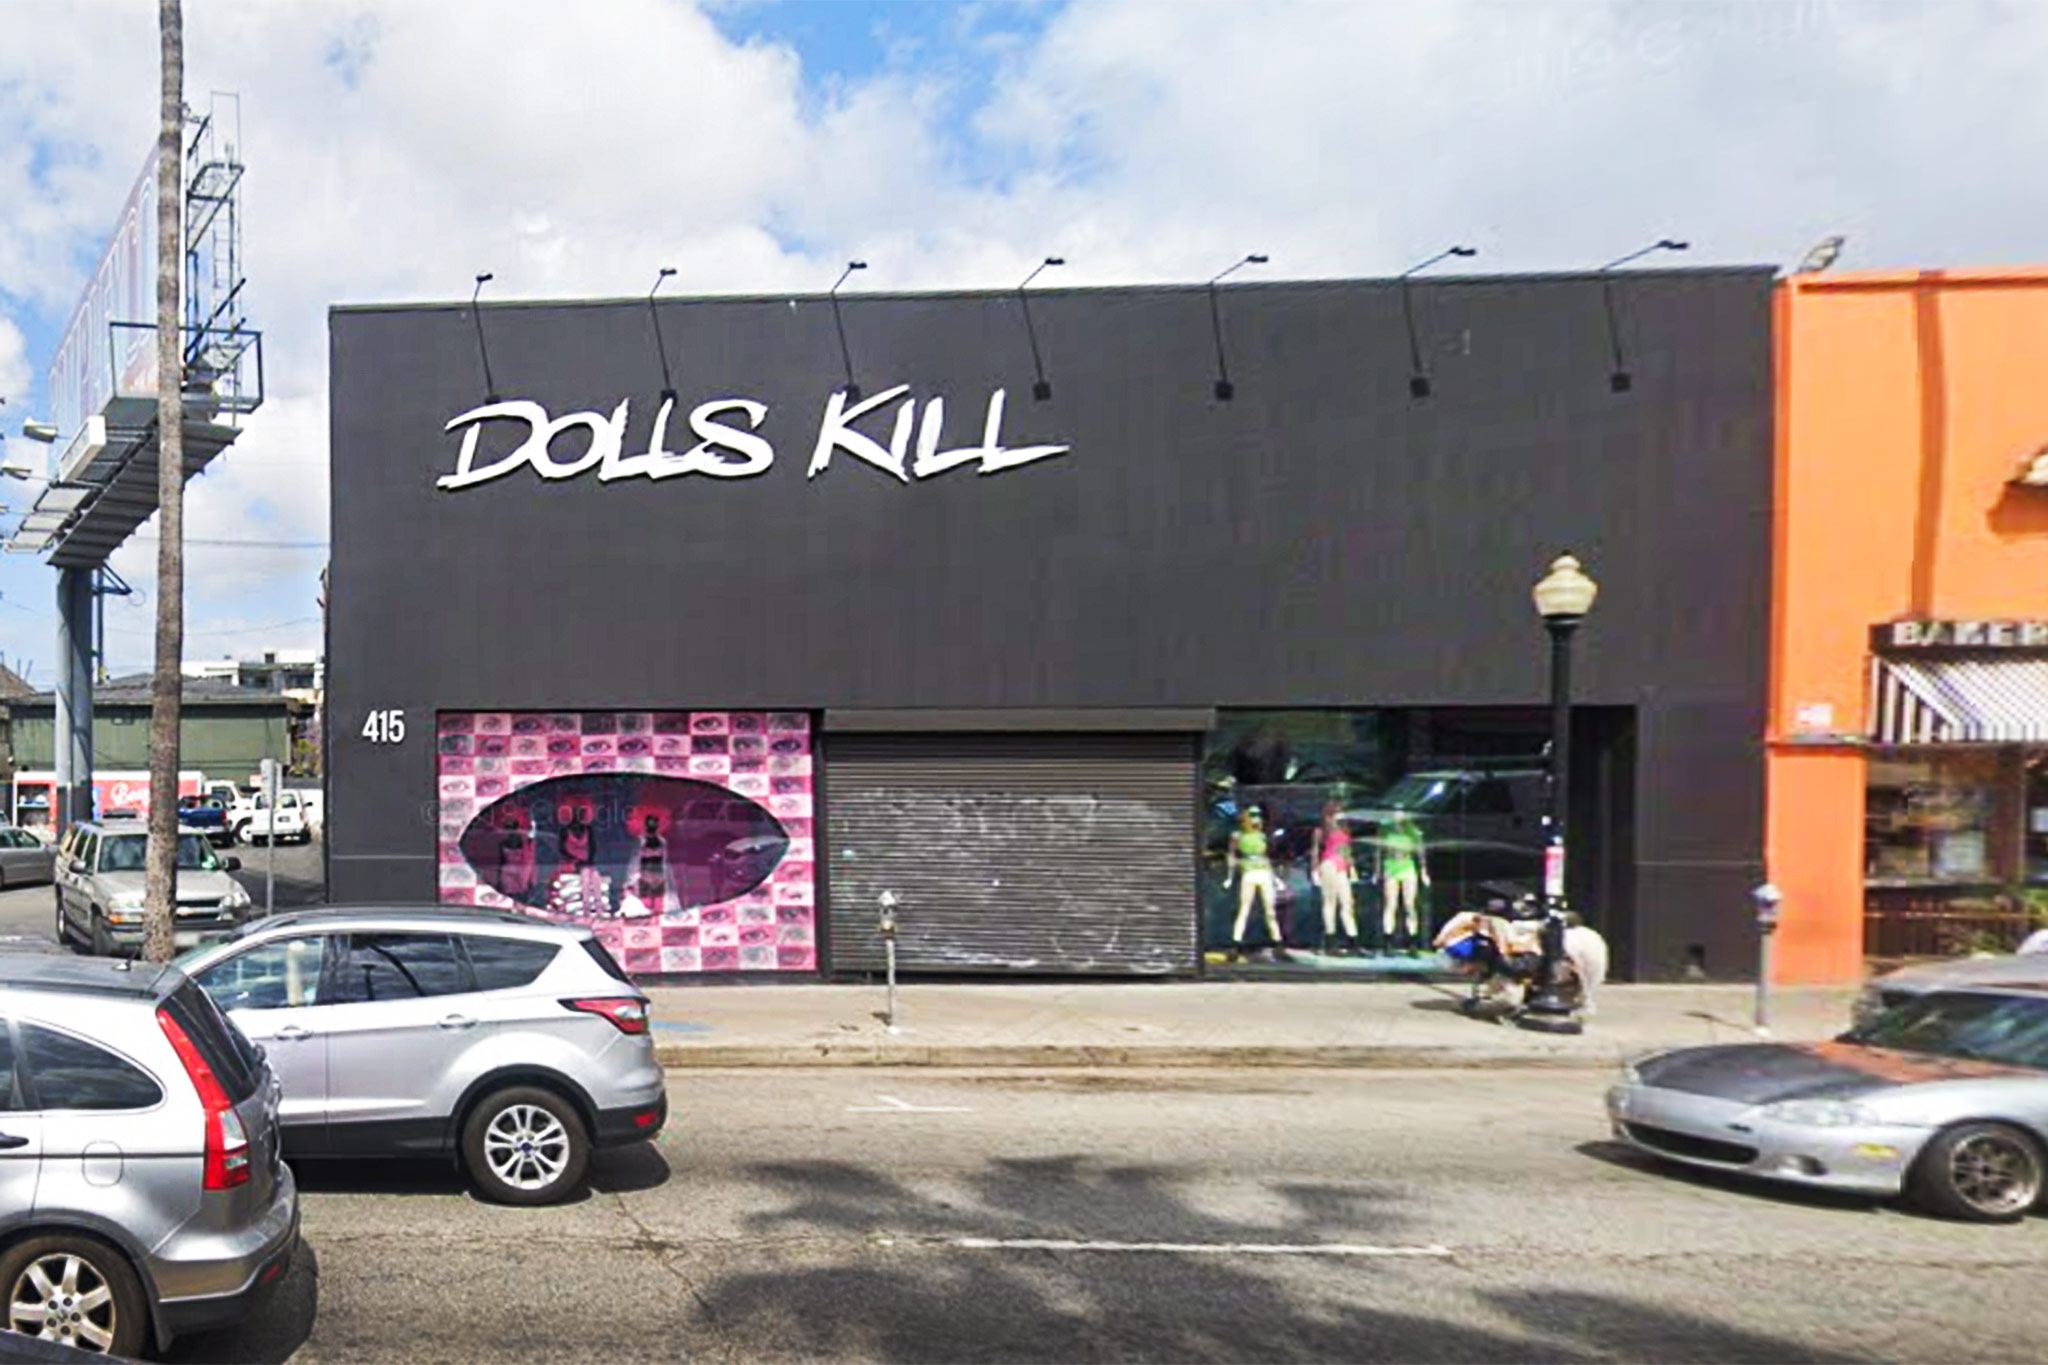 Dolls Kill address their insensitive clothing and inaction towards